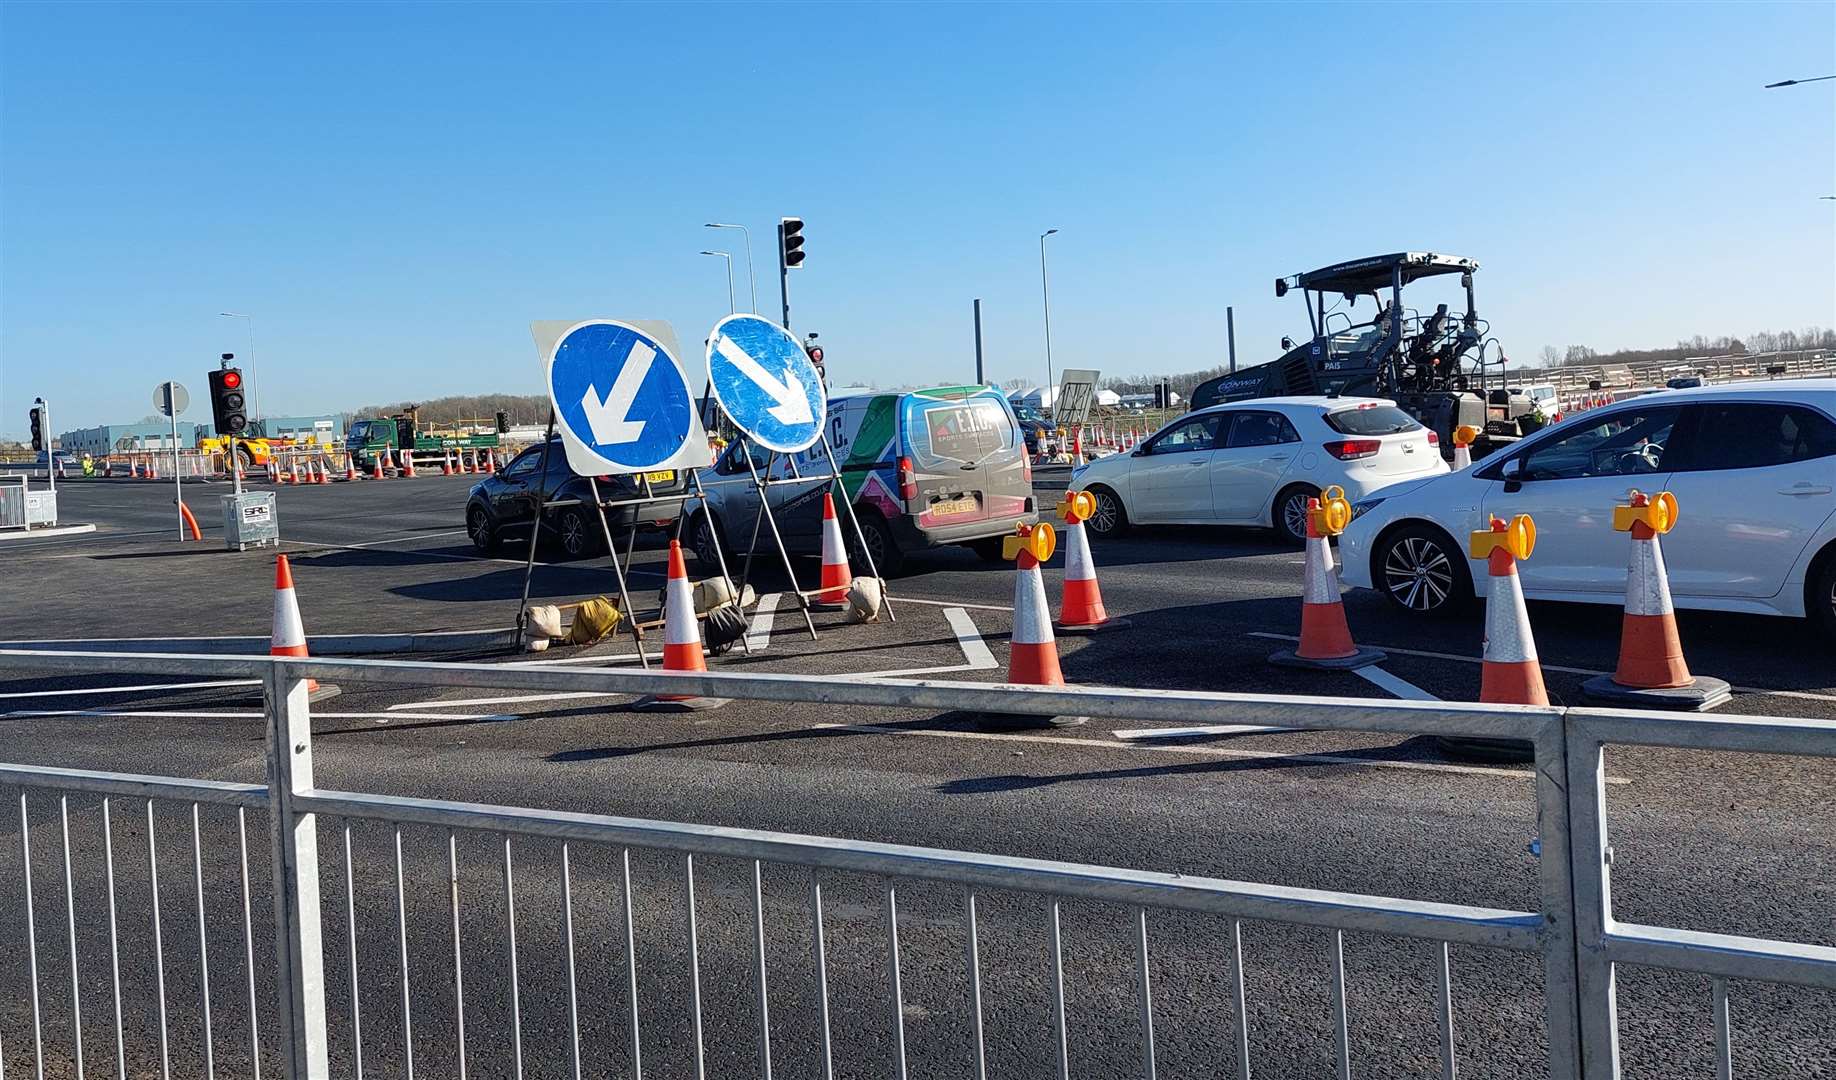 Drivers have faced delays on and around the Orbital Park junction for months